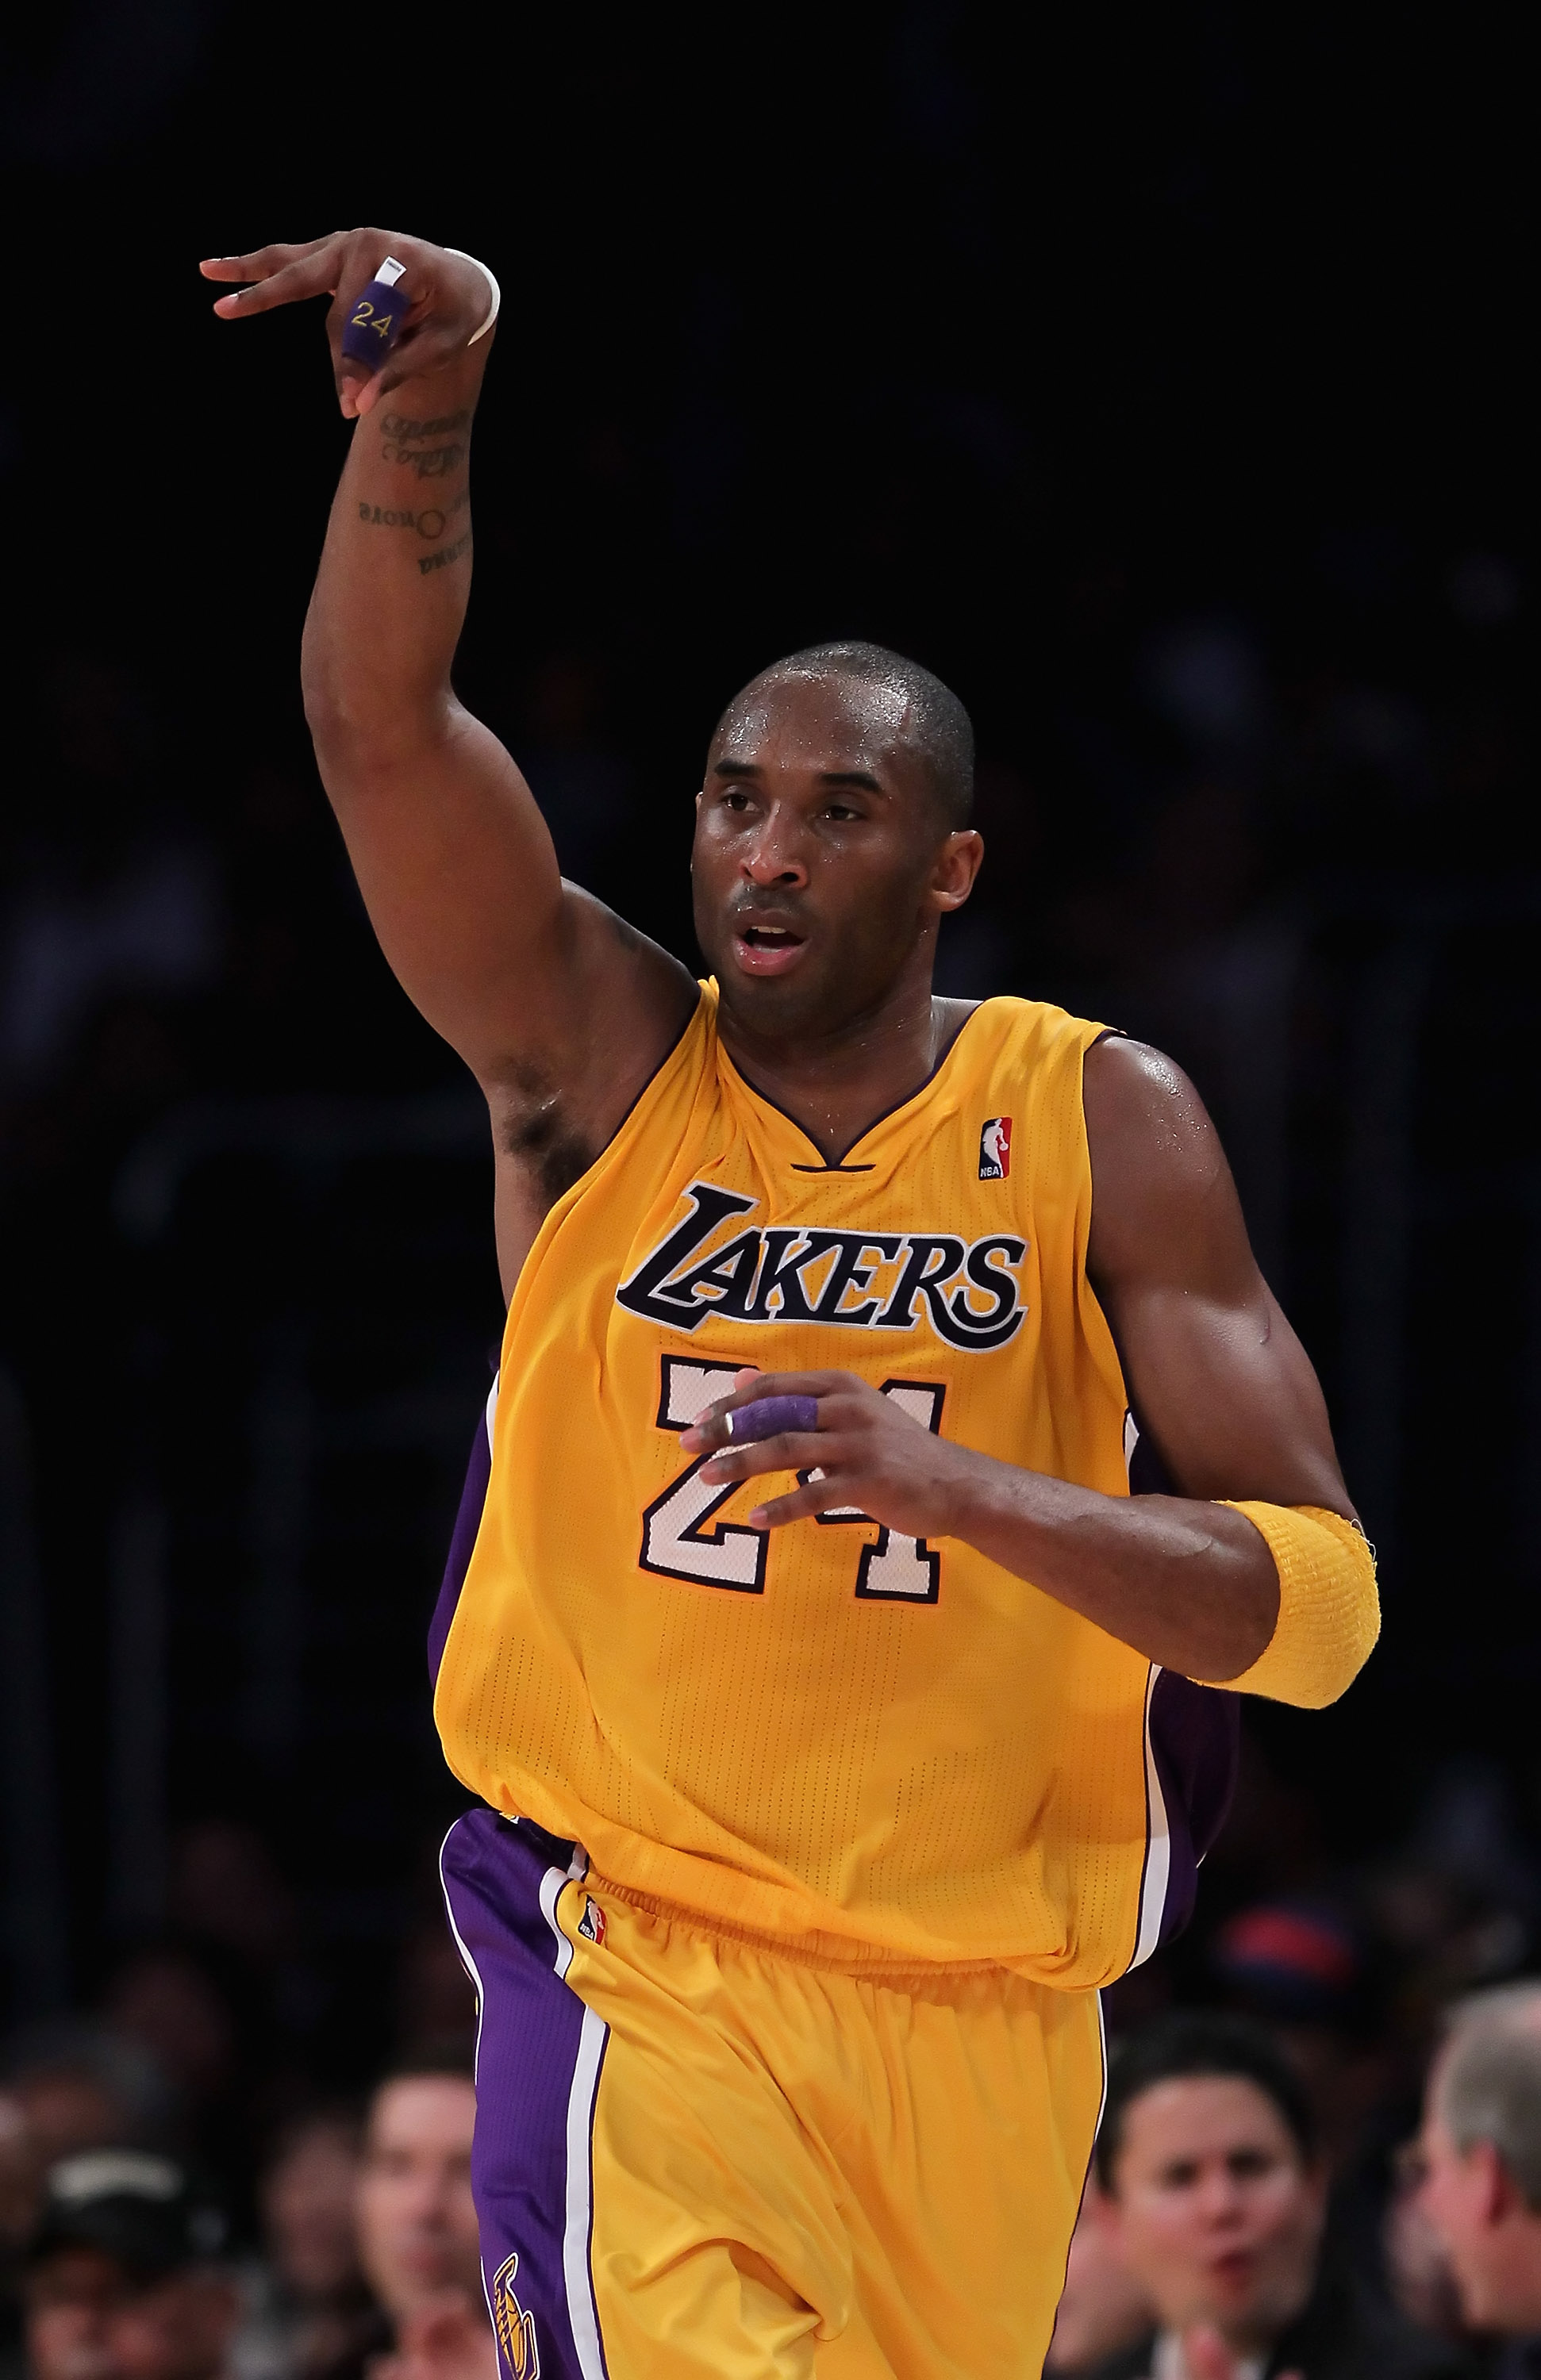 LOS ANGELES, CA - FEBRUARY 22:  Kobe Bryant #24 of the Los Angeles Lakers celebrates after making a three-point basket in the second half against the Atlanta Hawks at Staples Center on February 22, 2011 in Los Angeles, California. The Lakers defeated the